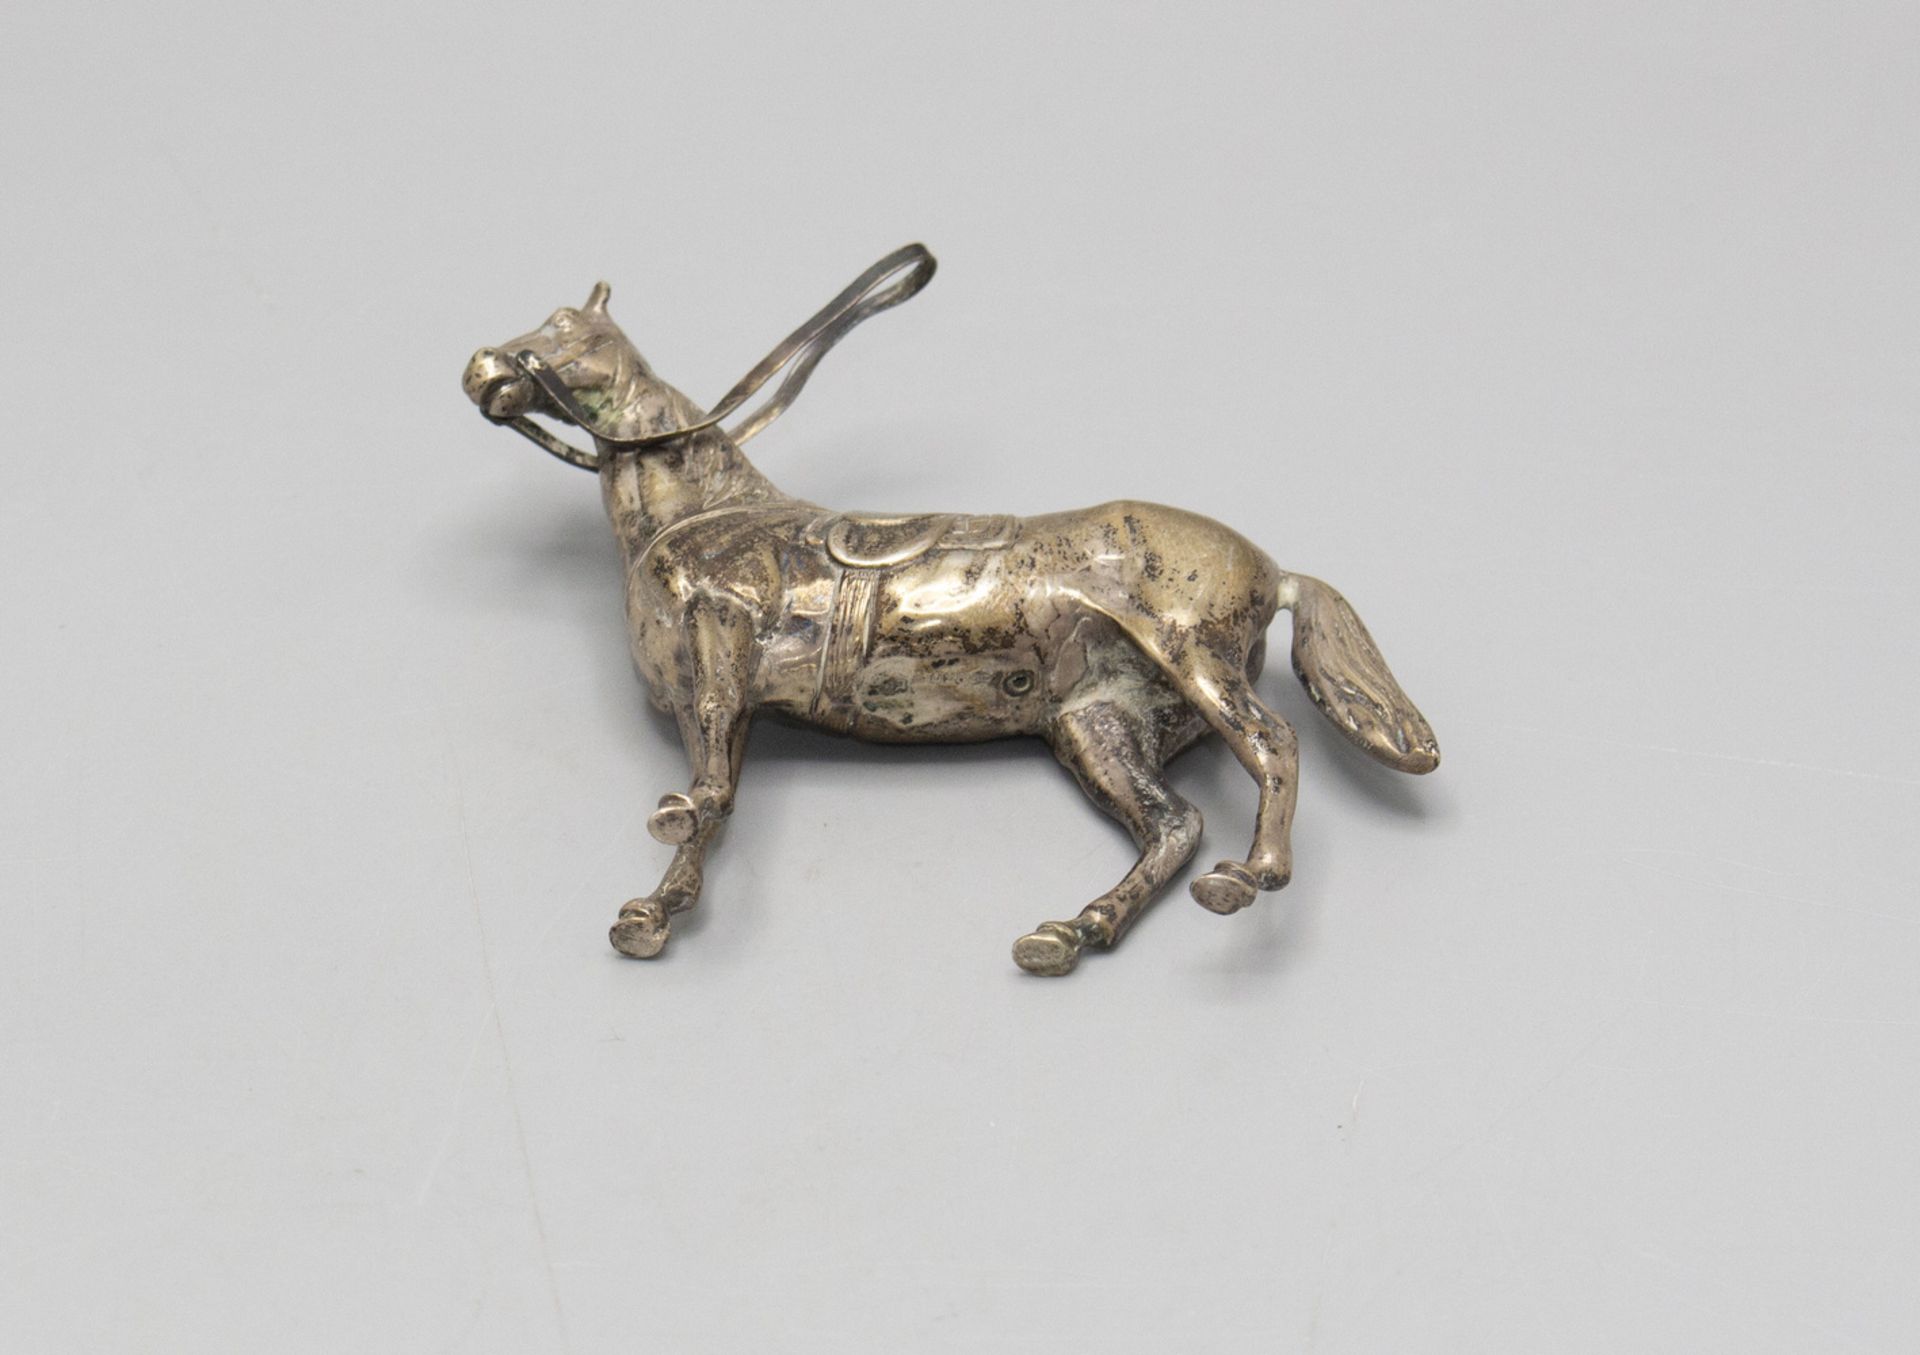 Pferdefigur mit Sattel und Trense / A silver figure of a horse with saddle and bridle, J.D. ... - Image 5 of 5